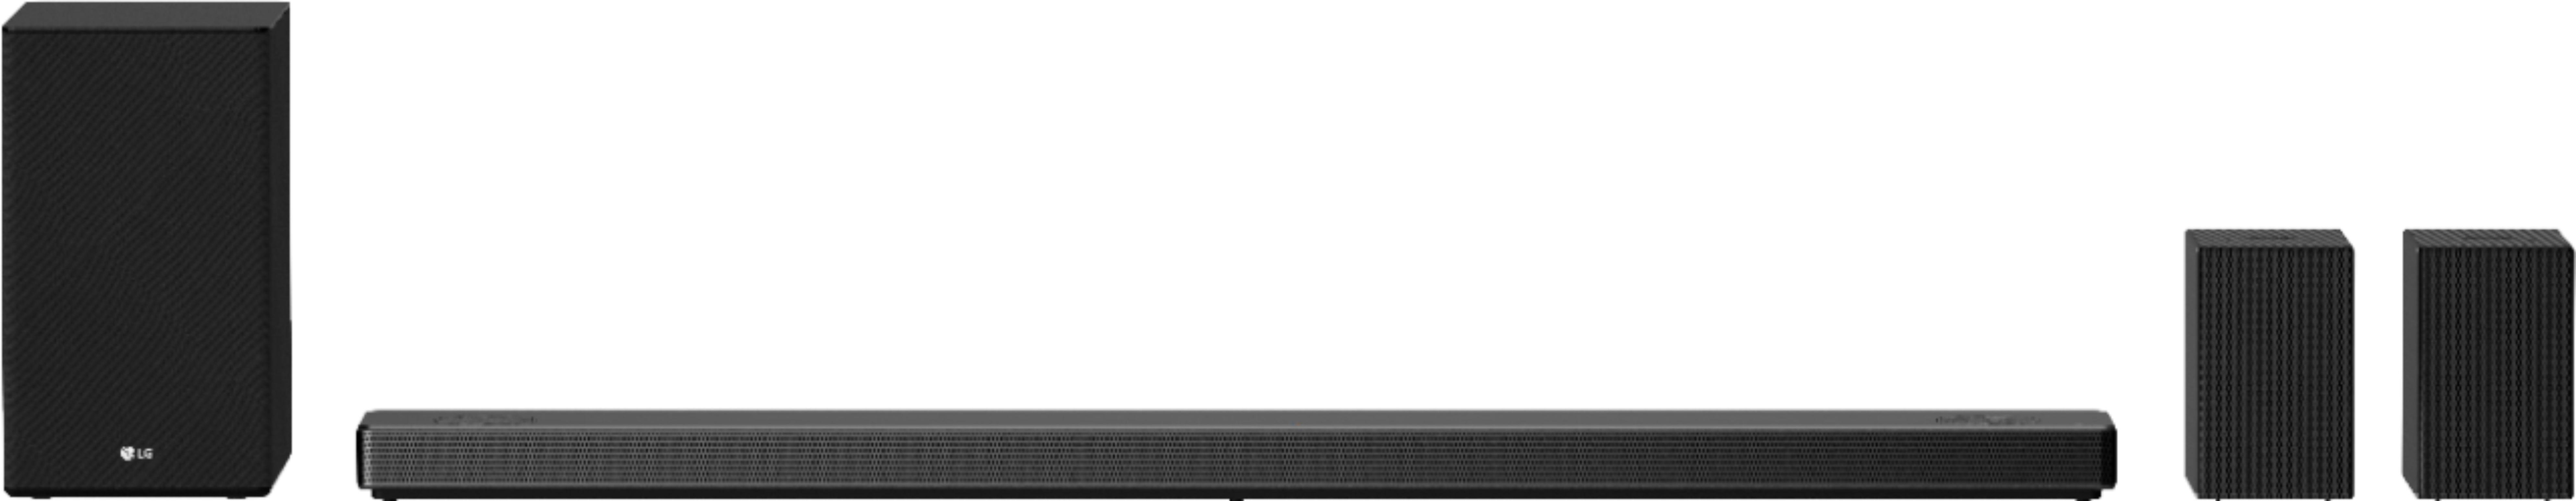 LG - 7.1.4-Channel 770W Soundbar System with Wireless Subwoofer and Dolby Atmos with Google Assistant - Black